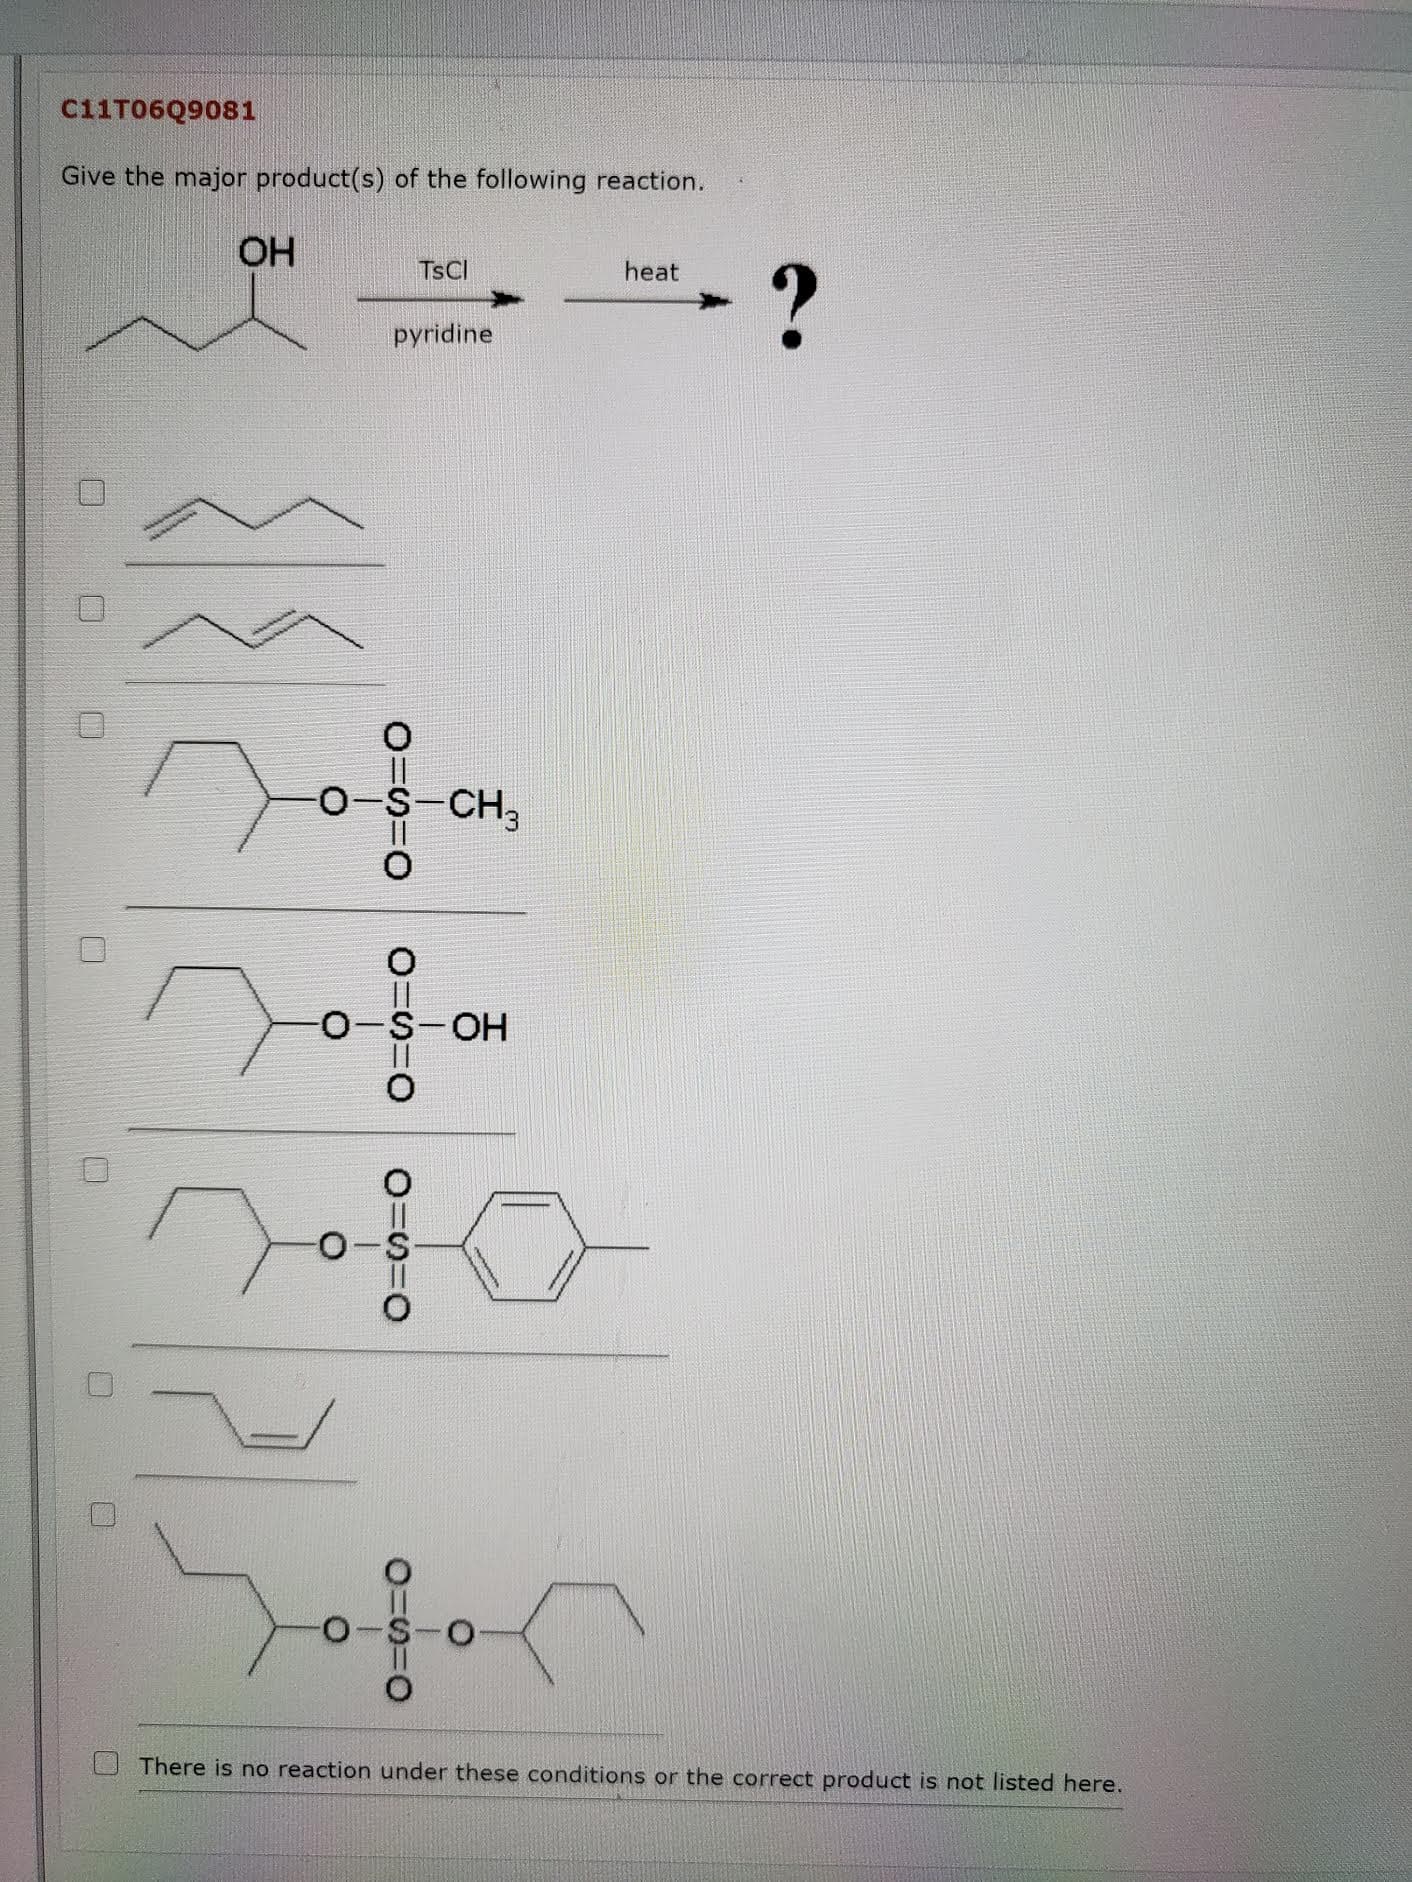 C11T06Q9081
Give the major product(s) of the following reaction.
OH
TSCI
heat
pyridine
